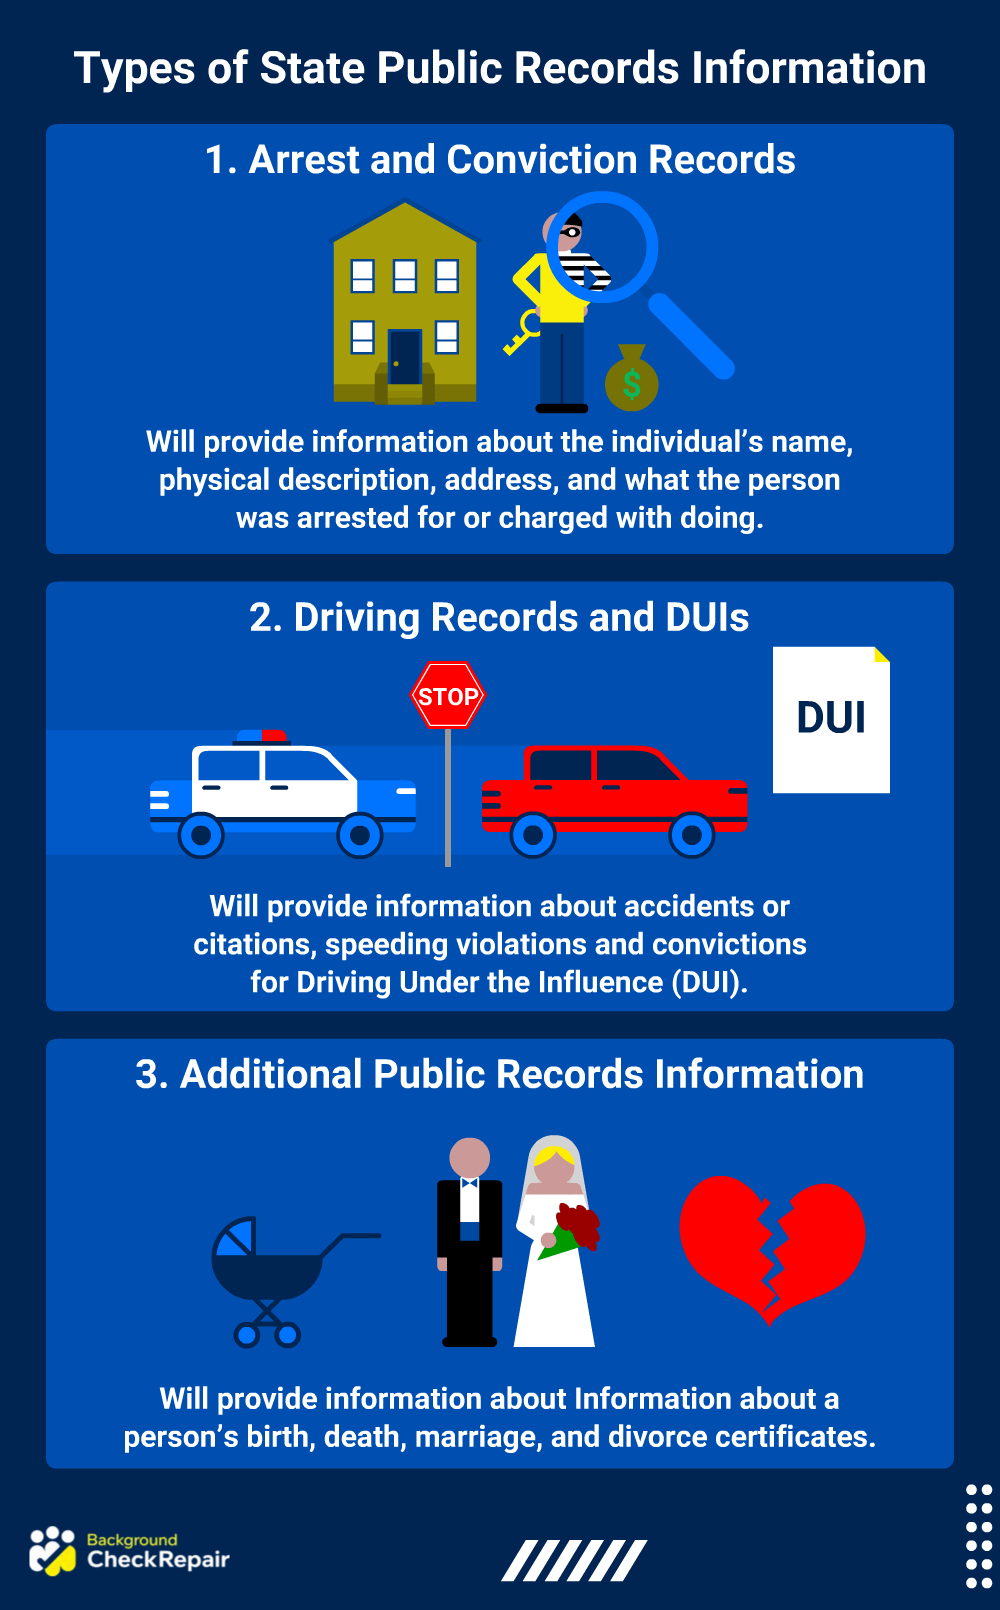 How to find someone's criminal record and state public records graphic showing arrests and convictions recrods, DUI and driving records and marriage, birth and divorce records are all available.